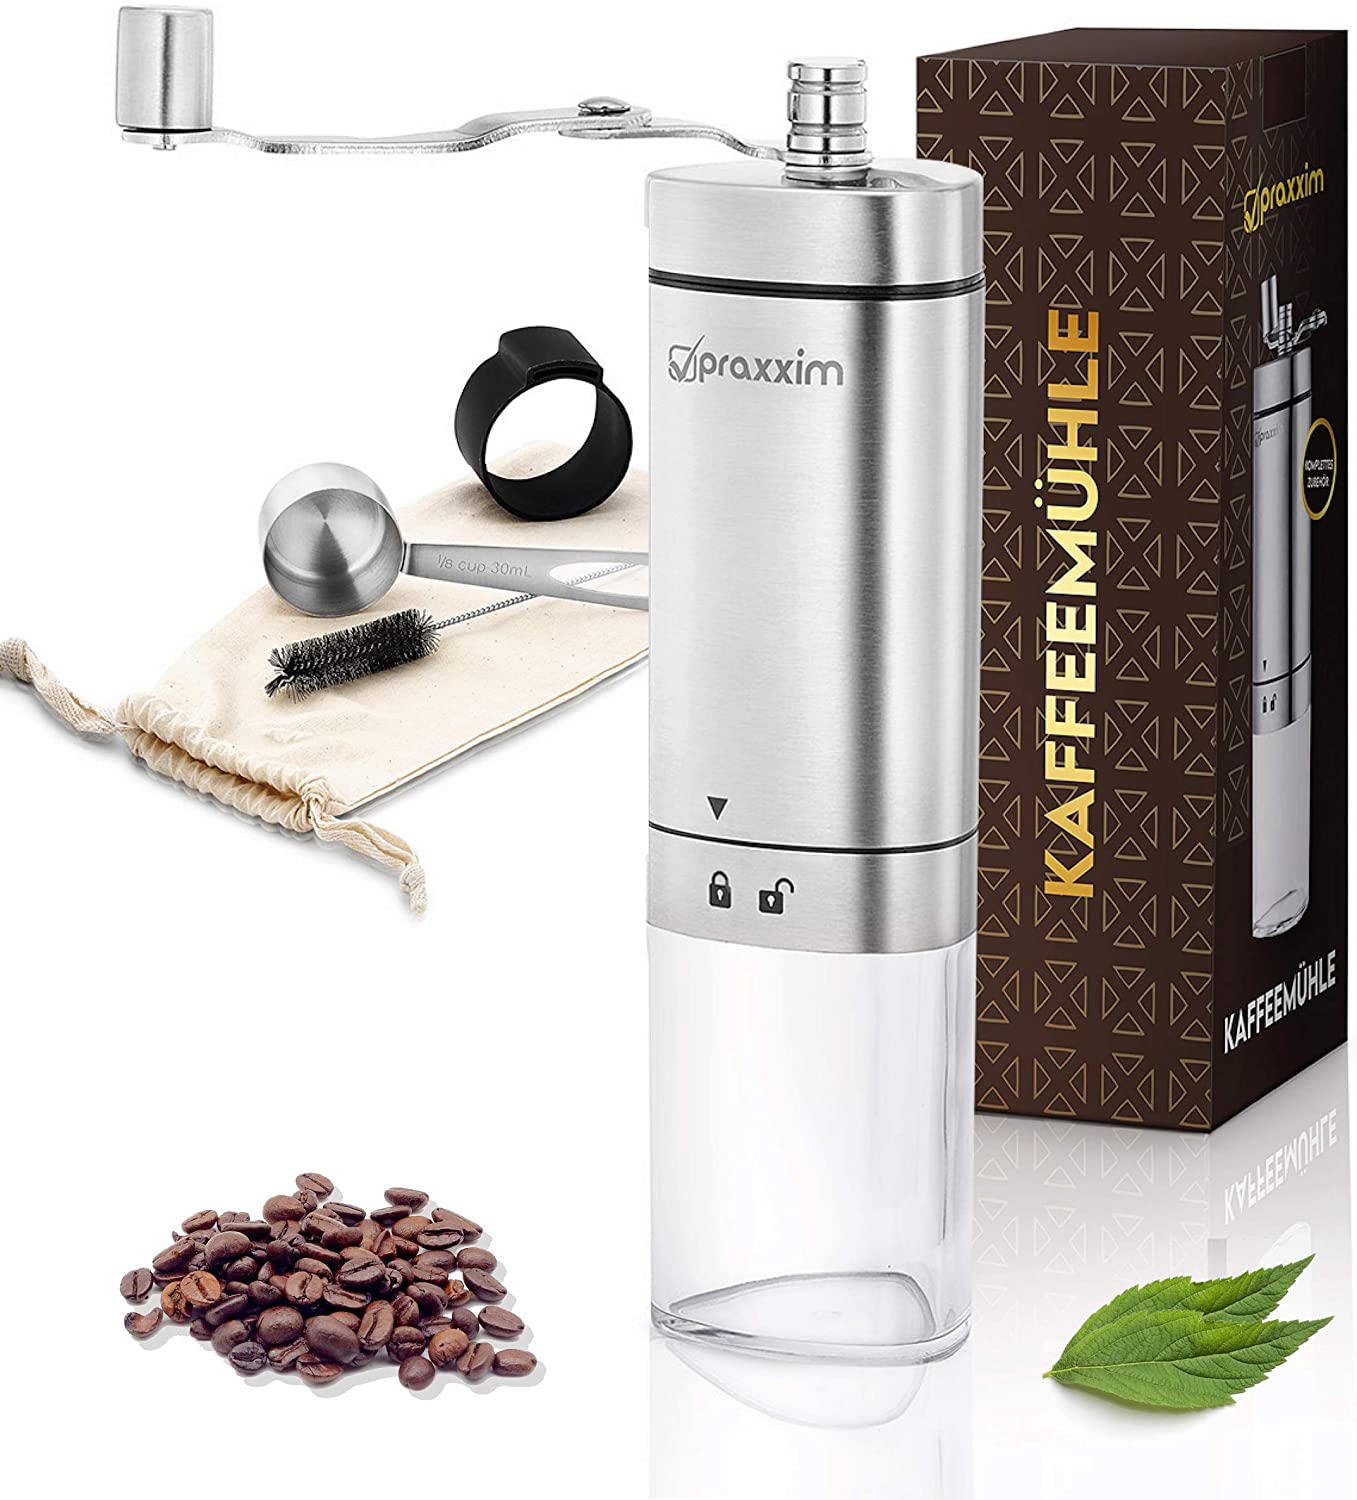 praxxim Manual Coffee Grinder - Hand Coffee Grinder in Elegant Design - Espresso Grinder for 60 ml Coffee Beans - Coffee Grinder with Practical Accessories for Relaxed Coffee Enjoyment